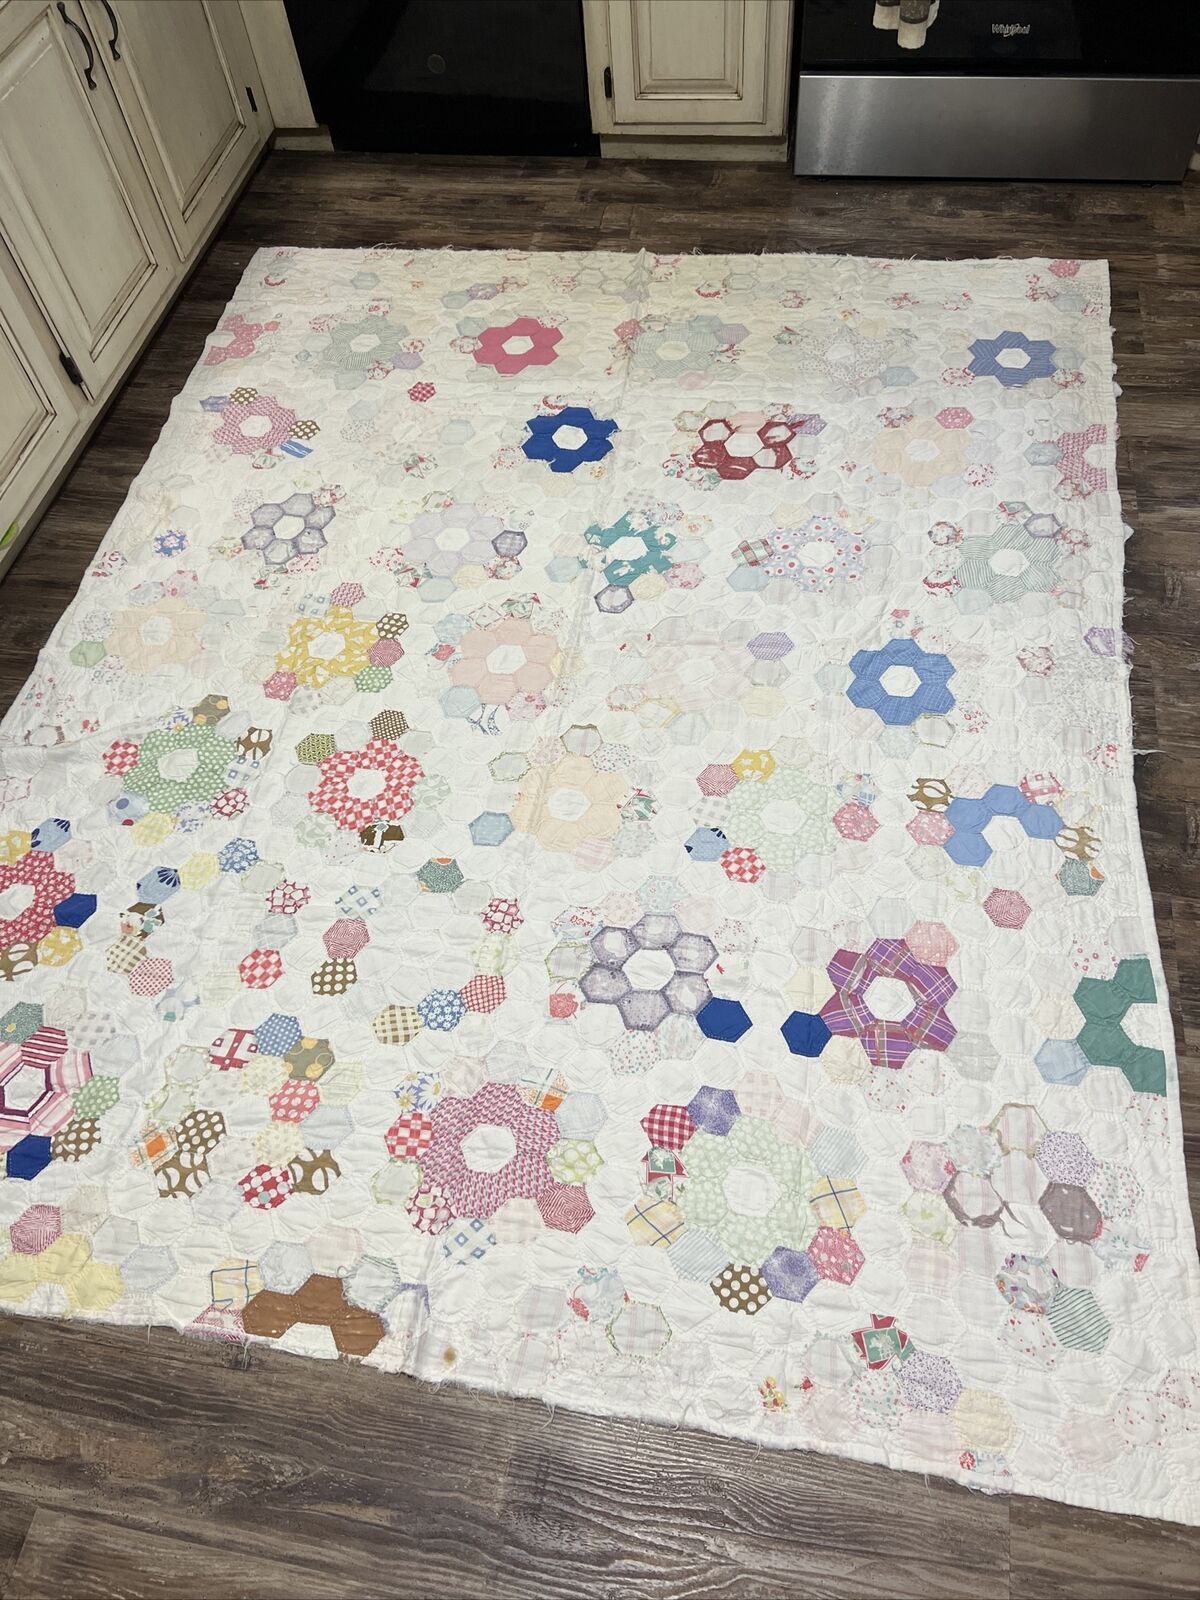 Vintage Antique Patchwork Quilt 66x82 Project Piece Ring Feedsack Shabby Chic